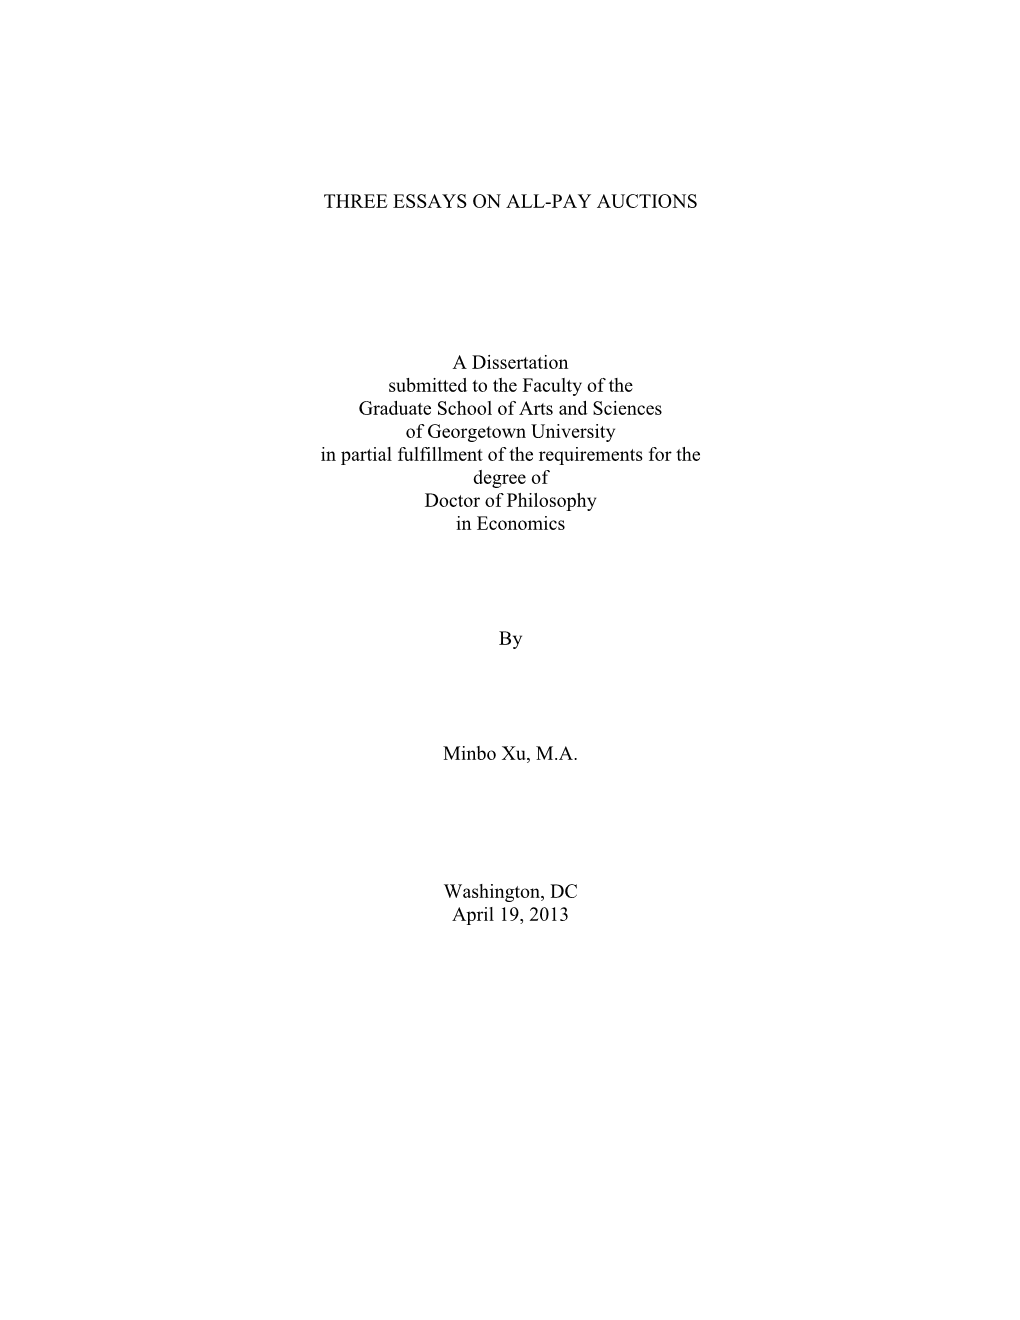 THREE ESSAYS on ALL-PAY AUCTIONS a Dissertation